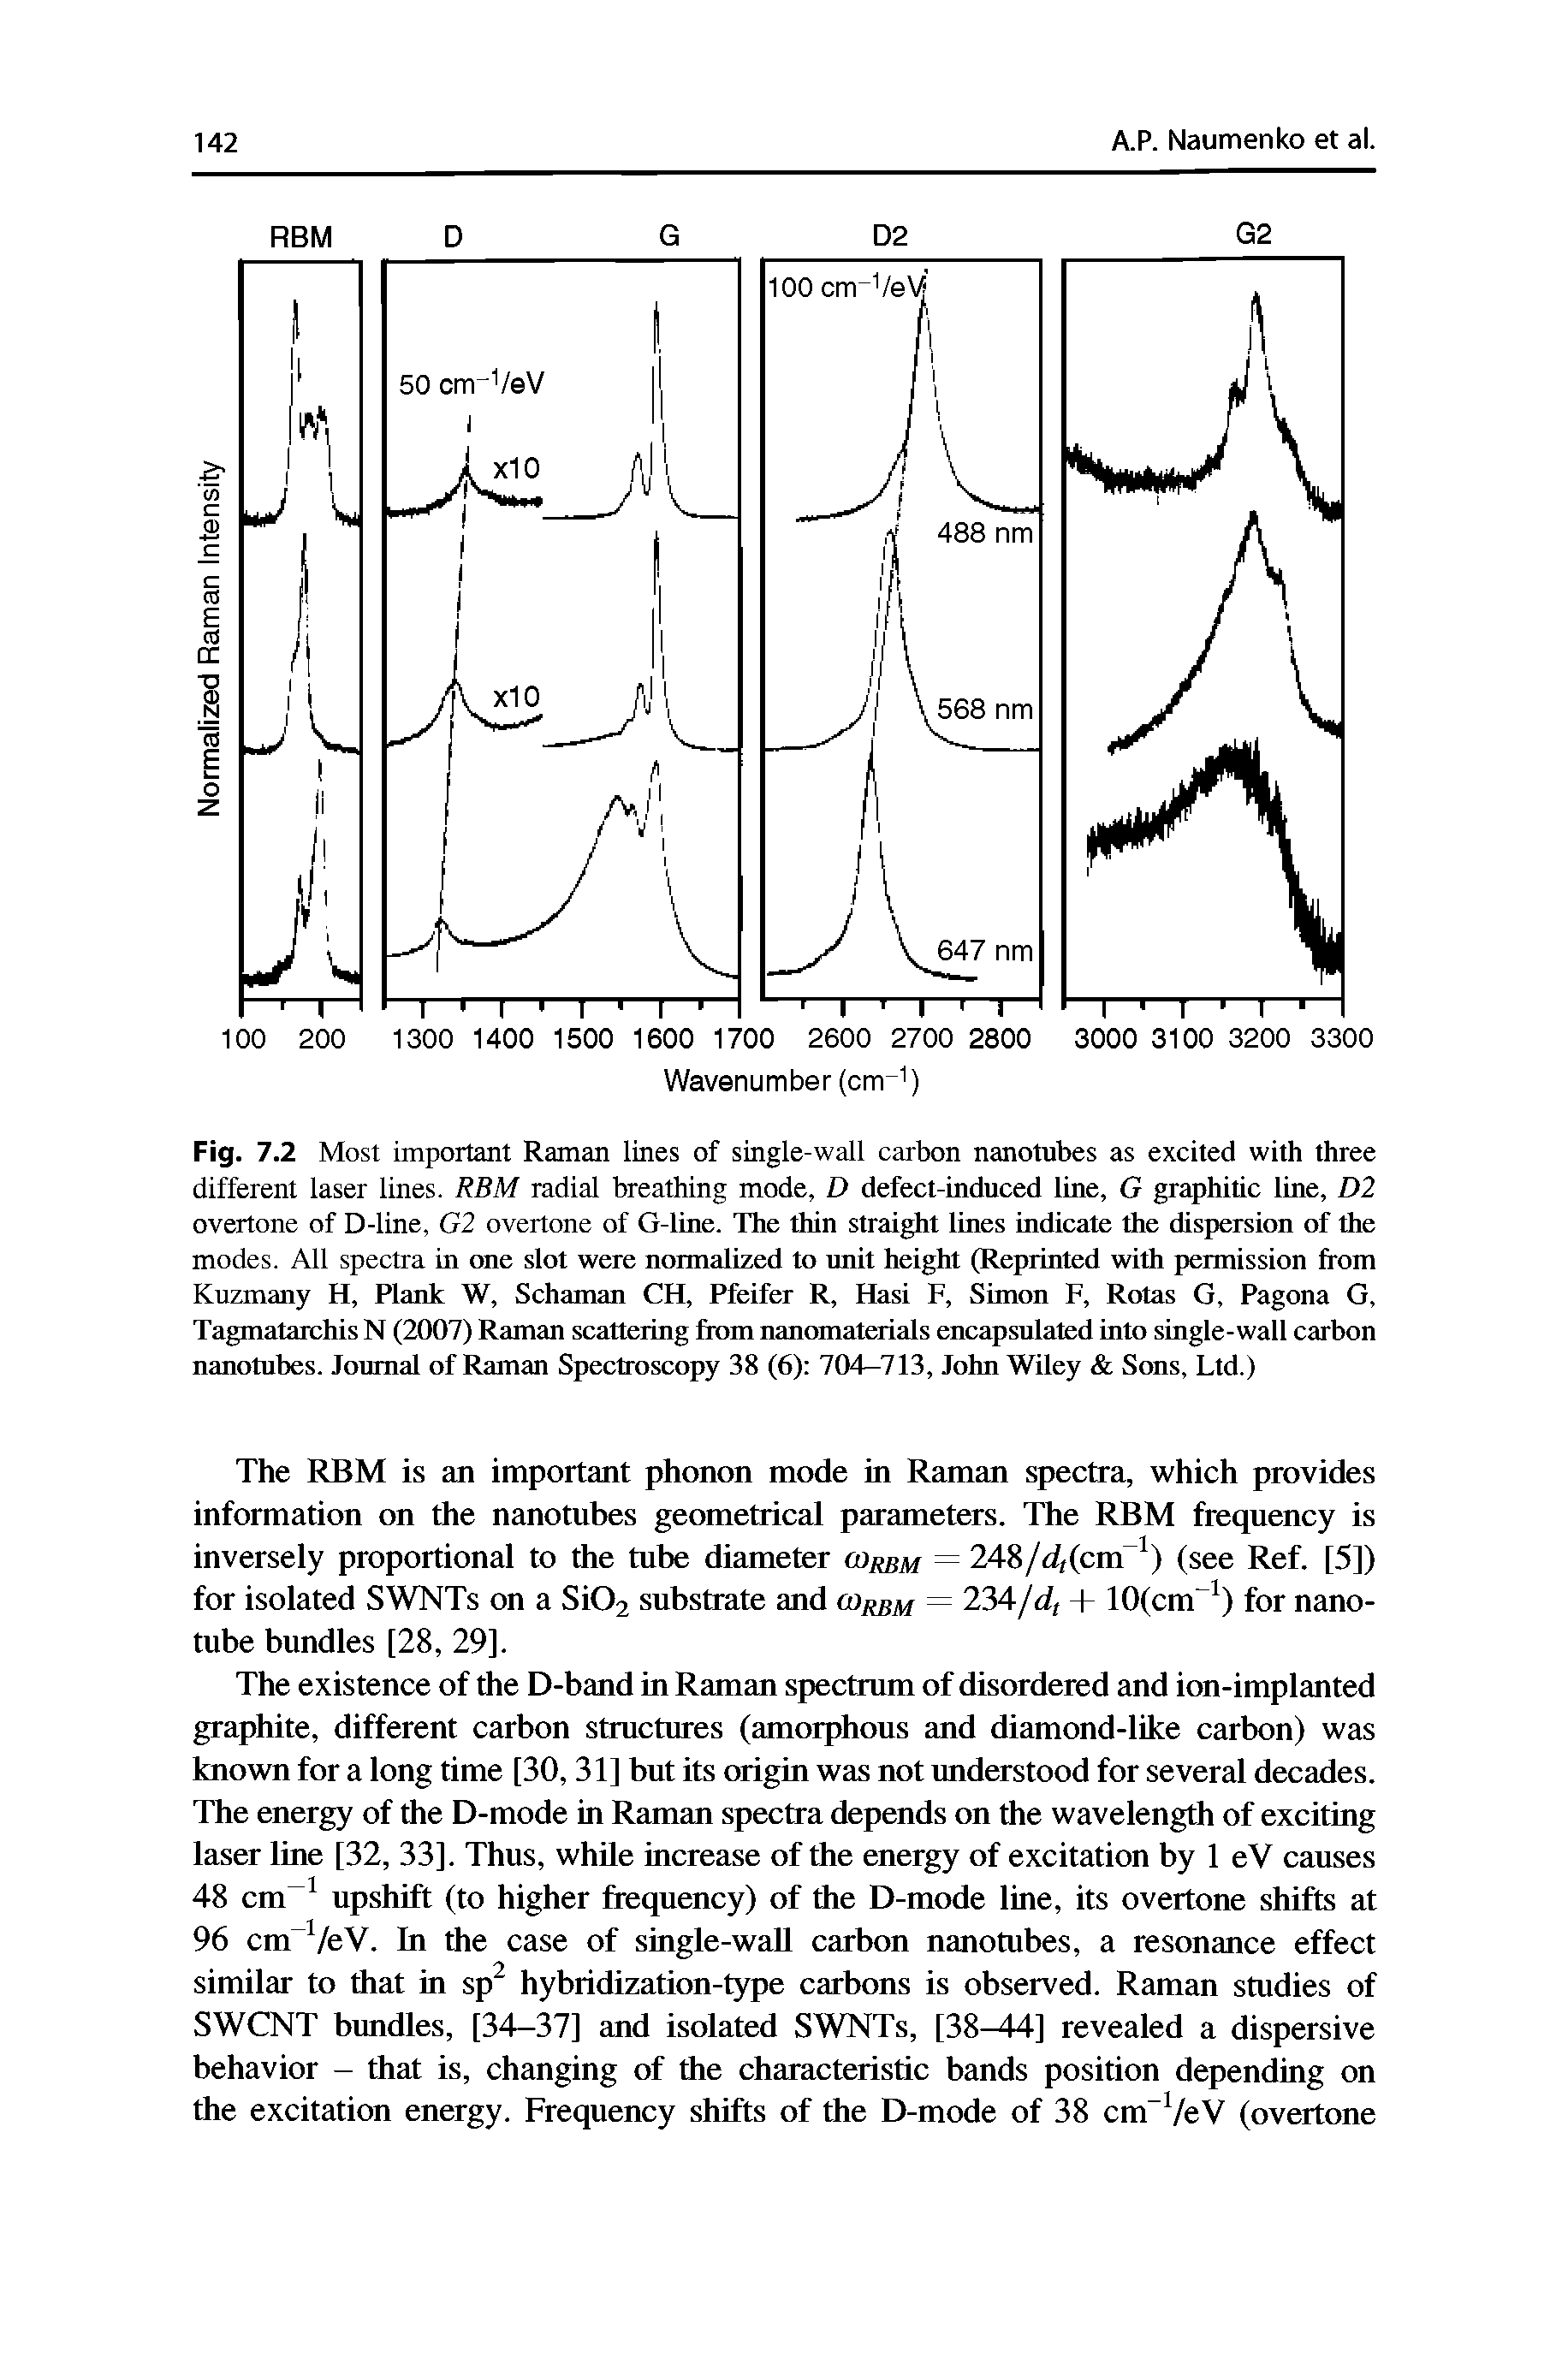 Fig. 7.2 Most important Raman lines of single-wall carbon nanotubes as excited with three different laser lines. RBM radial breathing mode, D defect-induced line, G graphitic line, D2 overtone of D-line, G2 overtone of G-line. The thin straight lines indicate the dispersion of the modes. All spectra in one slot were normalized to unit height (Reprinted with permission from Kuzmany H, Plank W, Schaman CH, Pfeifer R, Hasi F, Simon F, Rotas G, Pagona G, Tagmatarchis N (2007) Raman scattering from nanomaterials encapsulated into single-wall carbon nanotubes. Journal of Raman Spectroscopy 38 (6) 704—713, John Wiley Sons, Ltd.)...